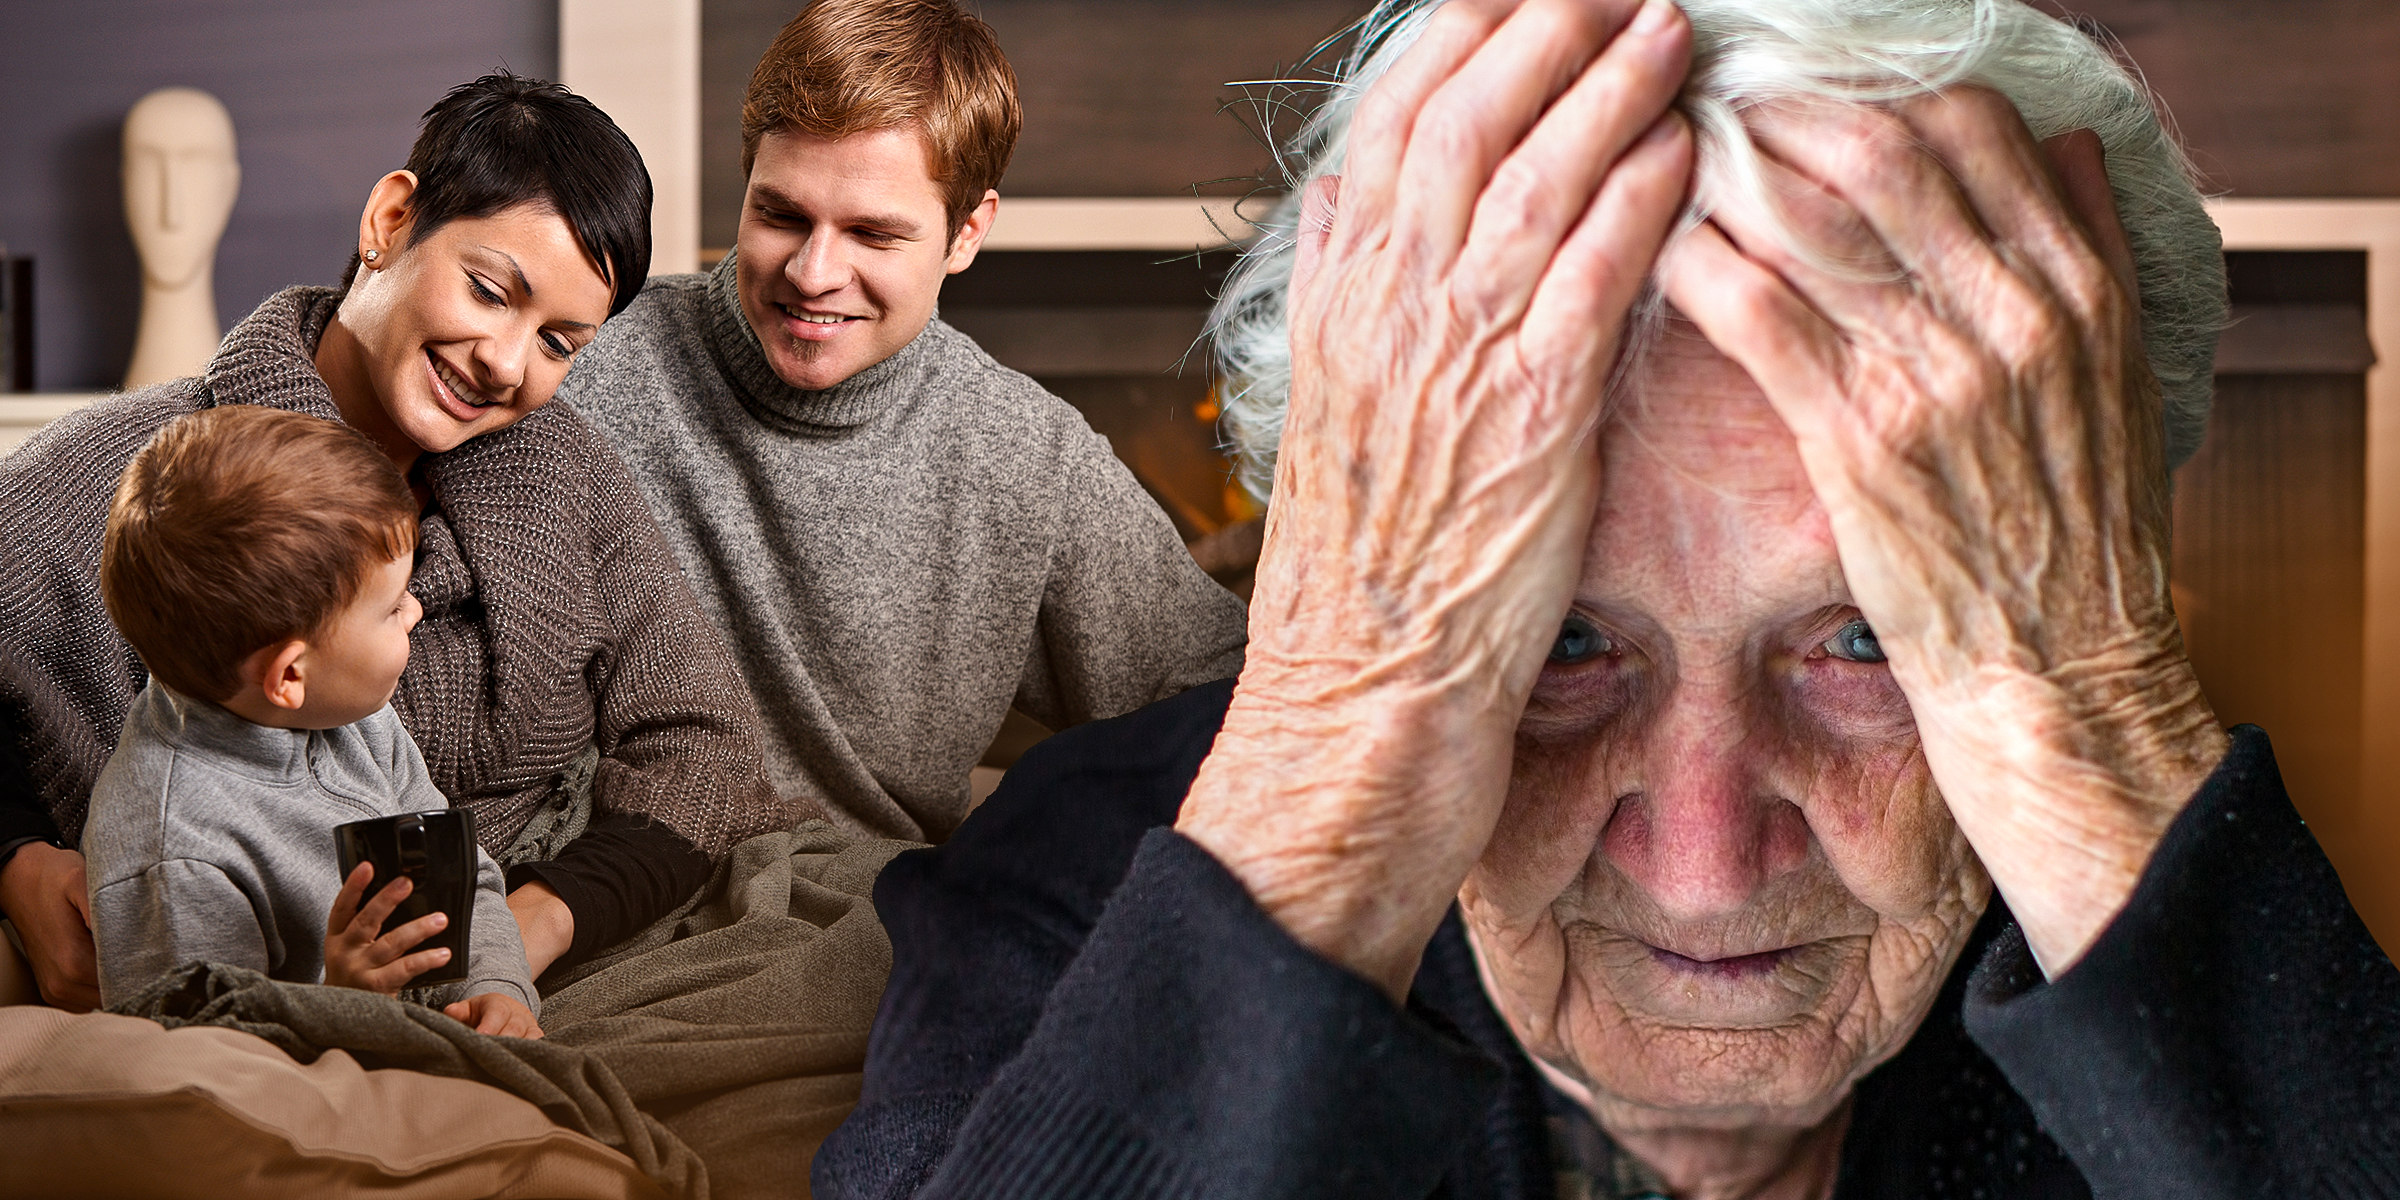 A happy family of three and a distraught older woman | Source: Shutterstock